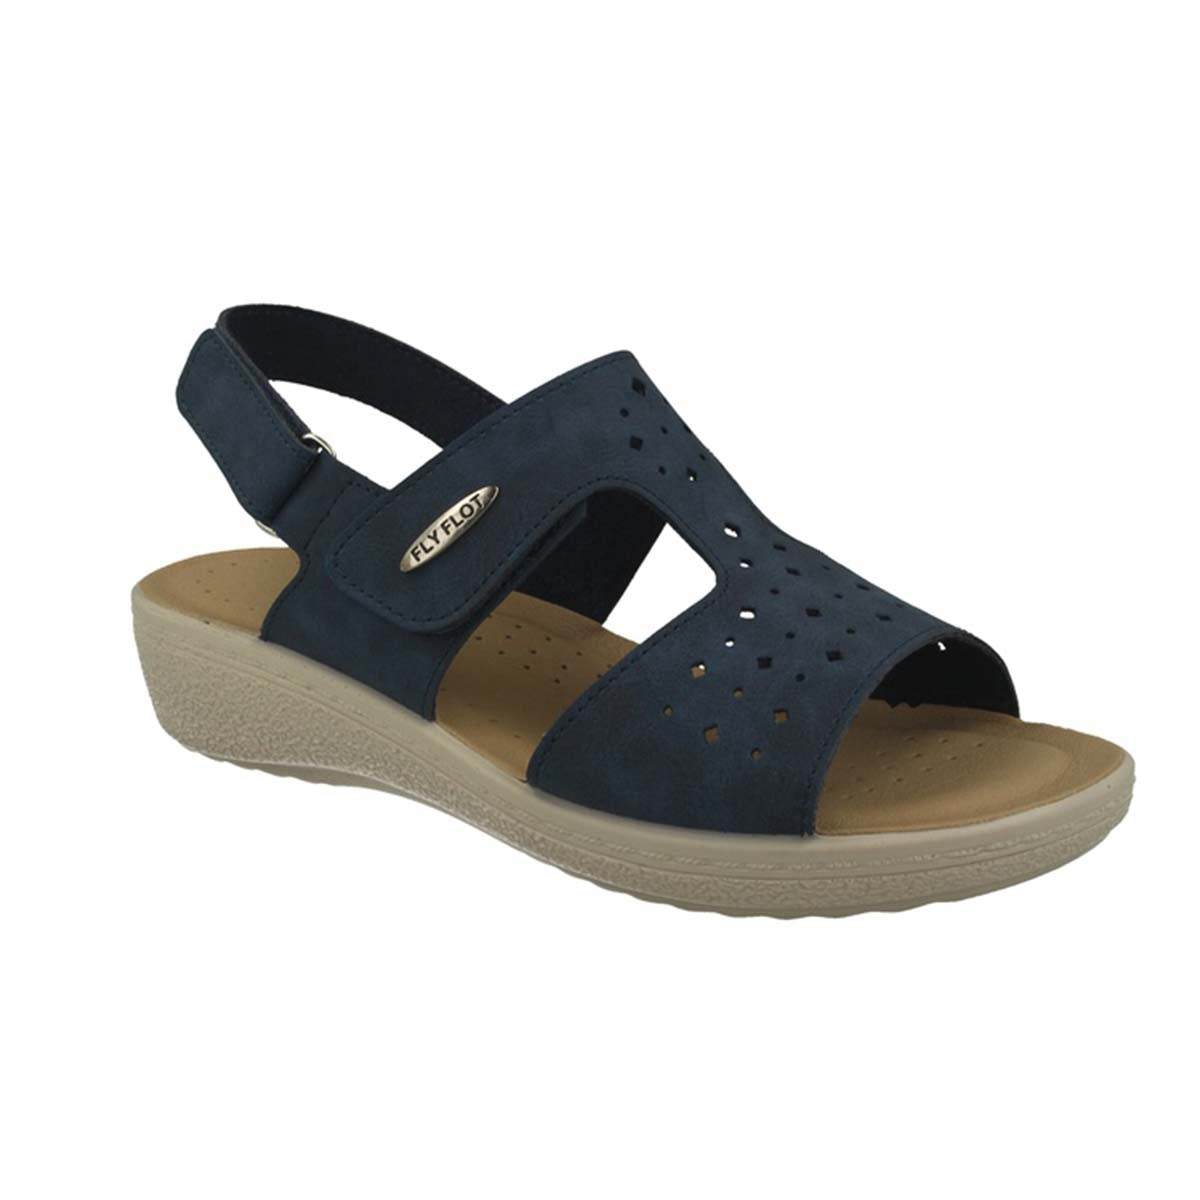 See the Velcro Back Strap Faux Leather Women Sandals in the colour BEIGE, available in various sizes